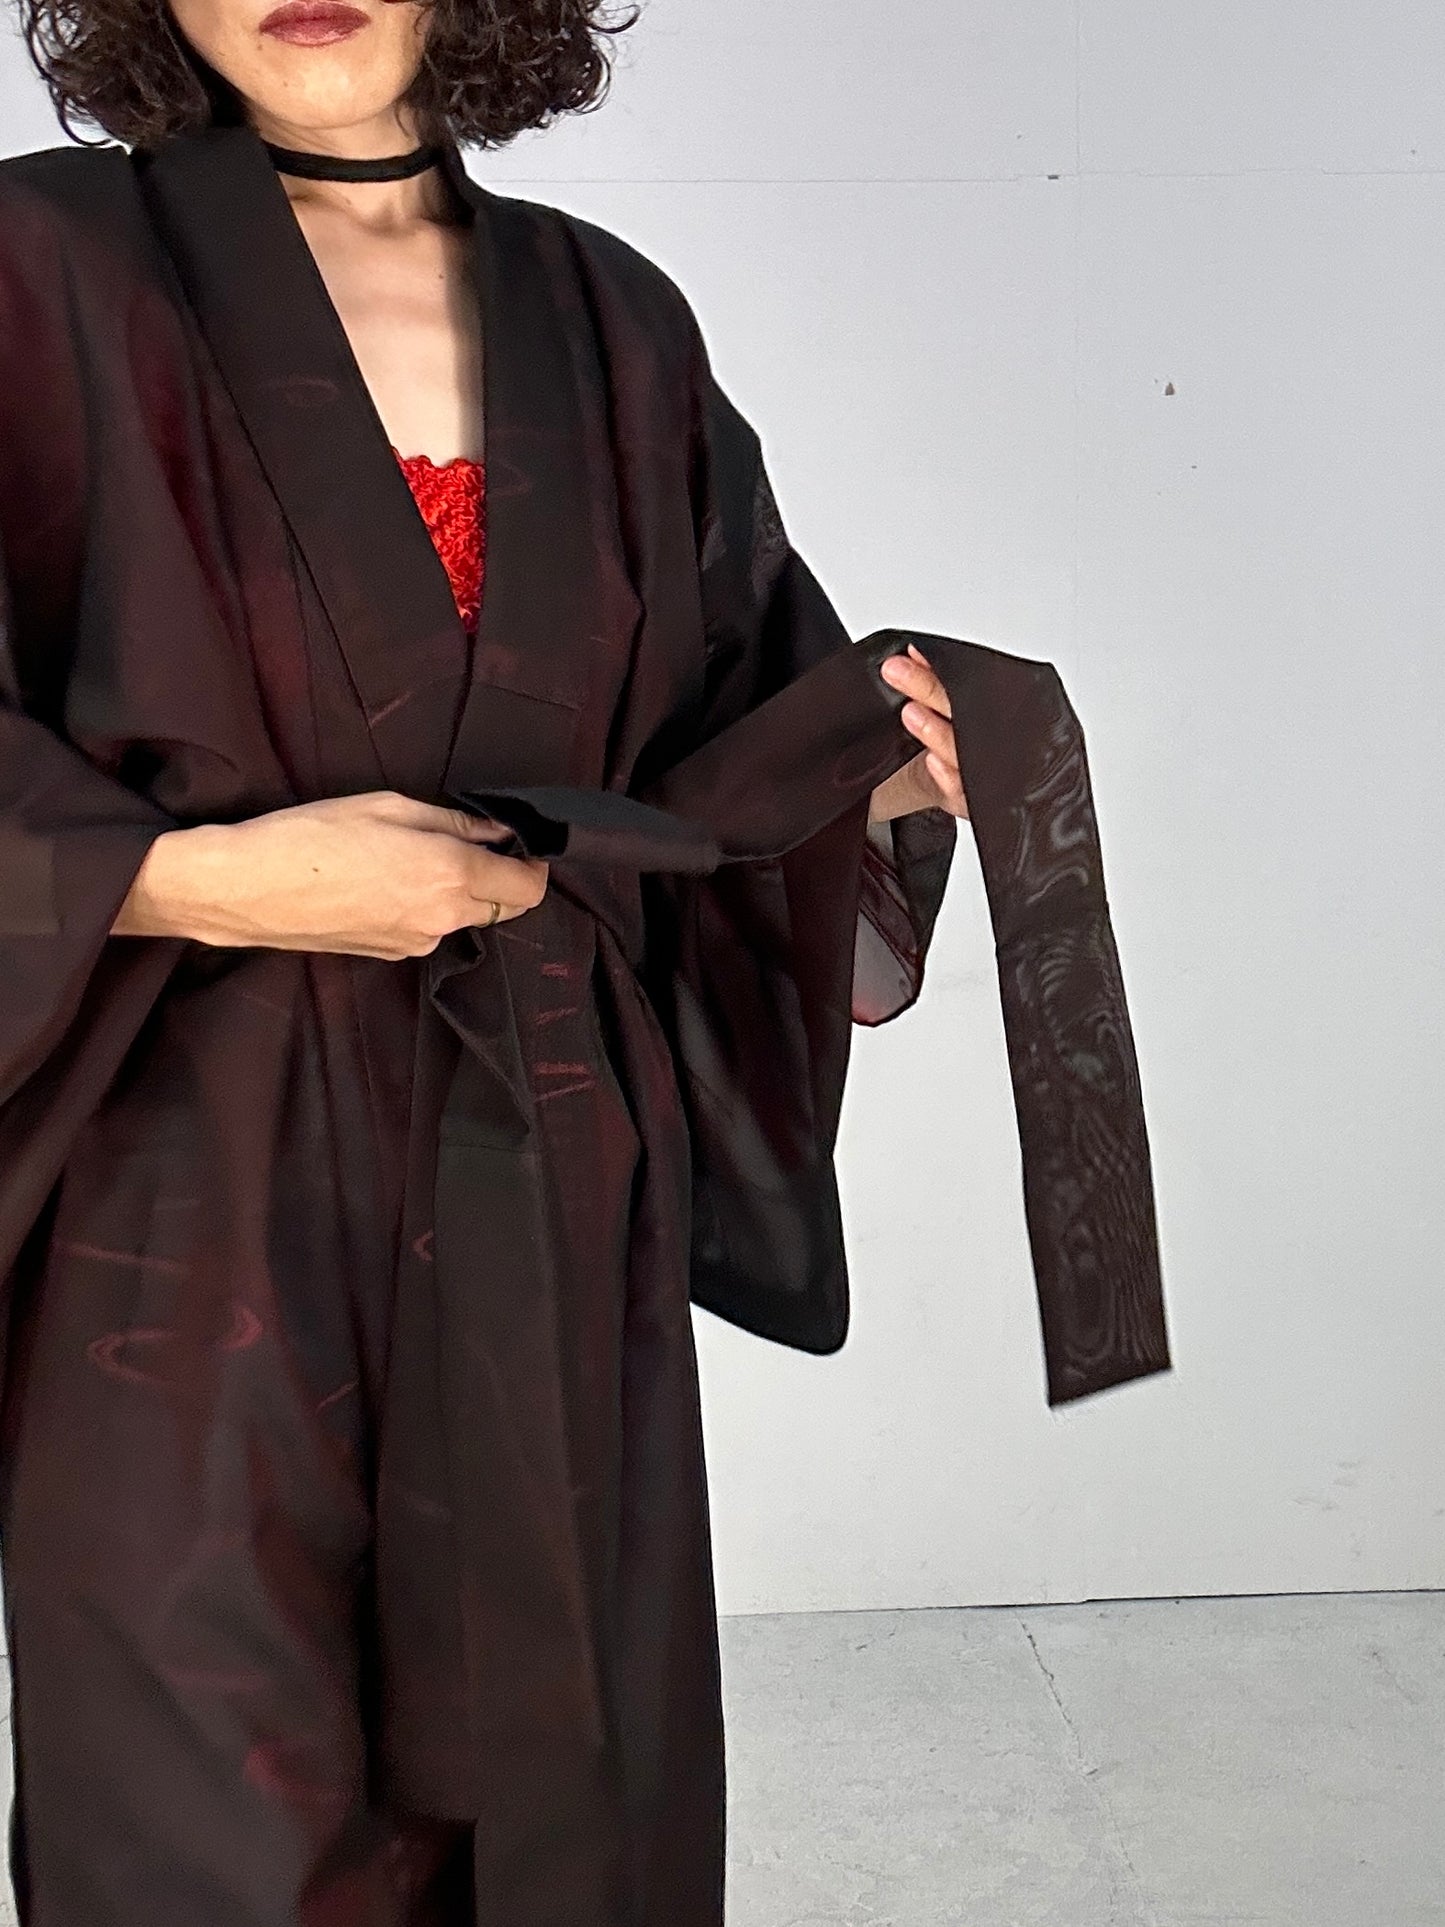 SHEER kimono dress gown and string belt upcycled from Japanese kimono